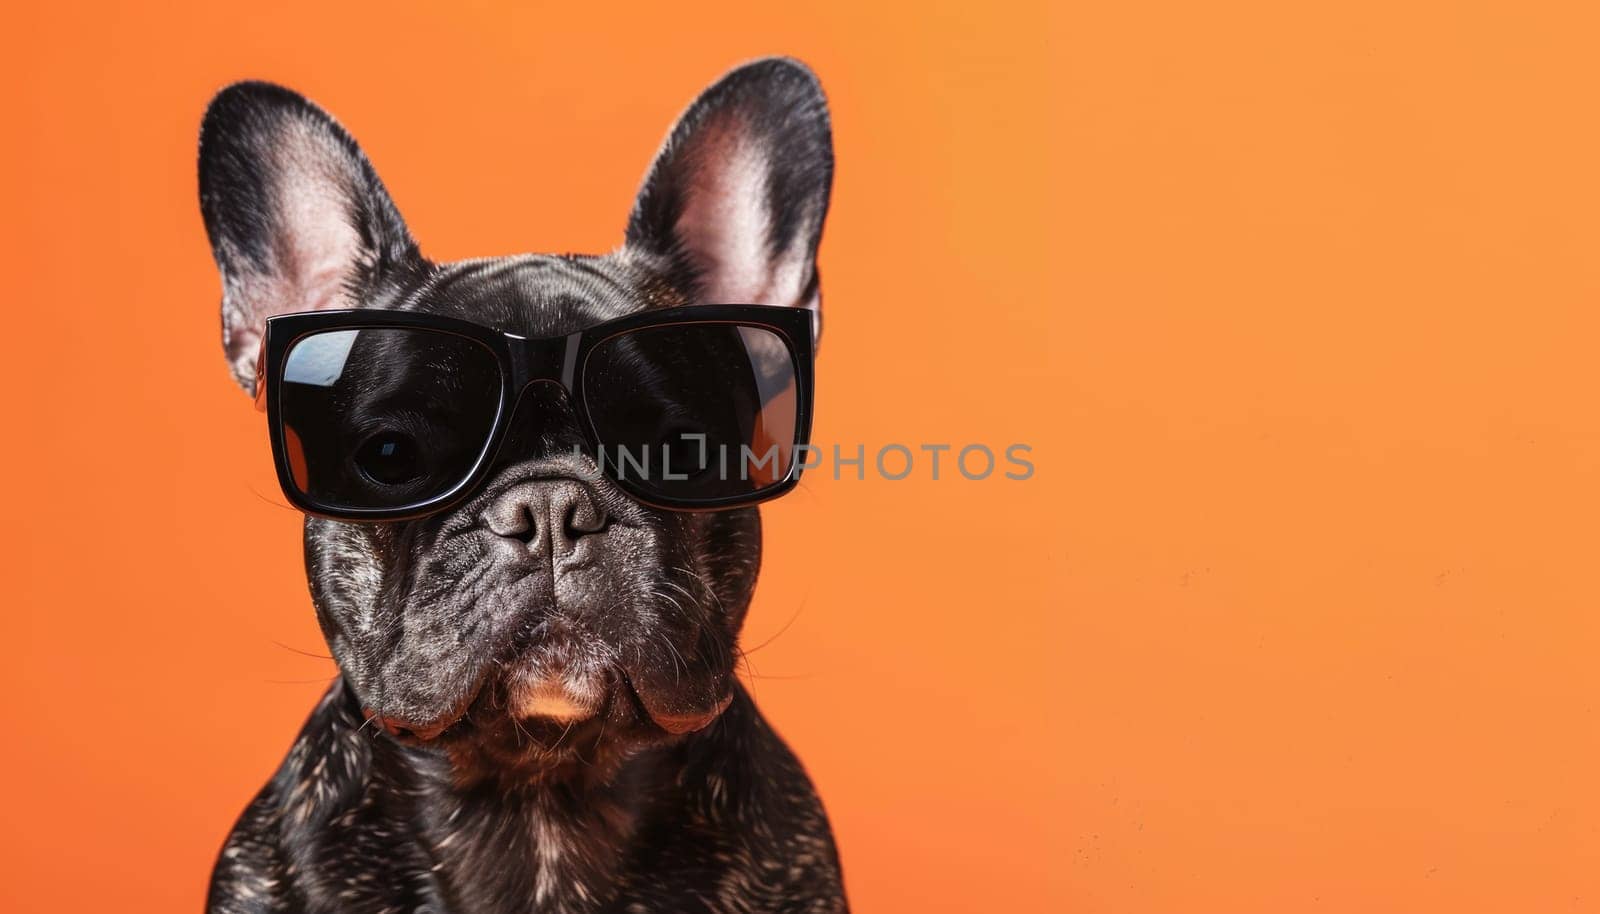 A dog wearing sunglasses and standing in front of an orange background by wichayada